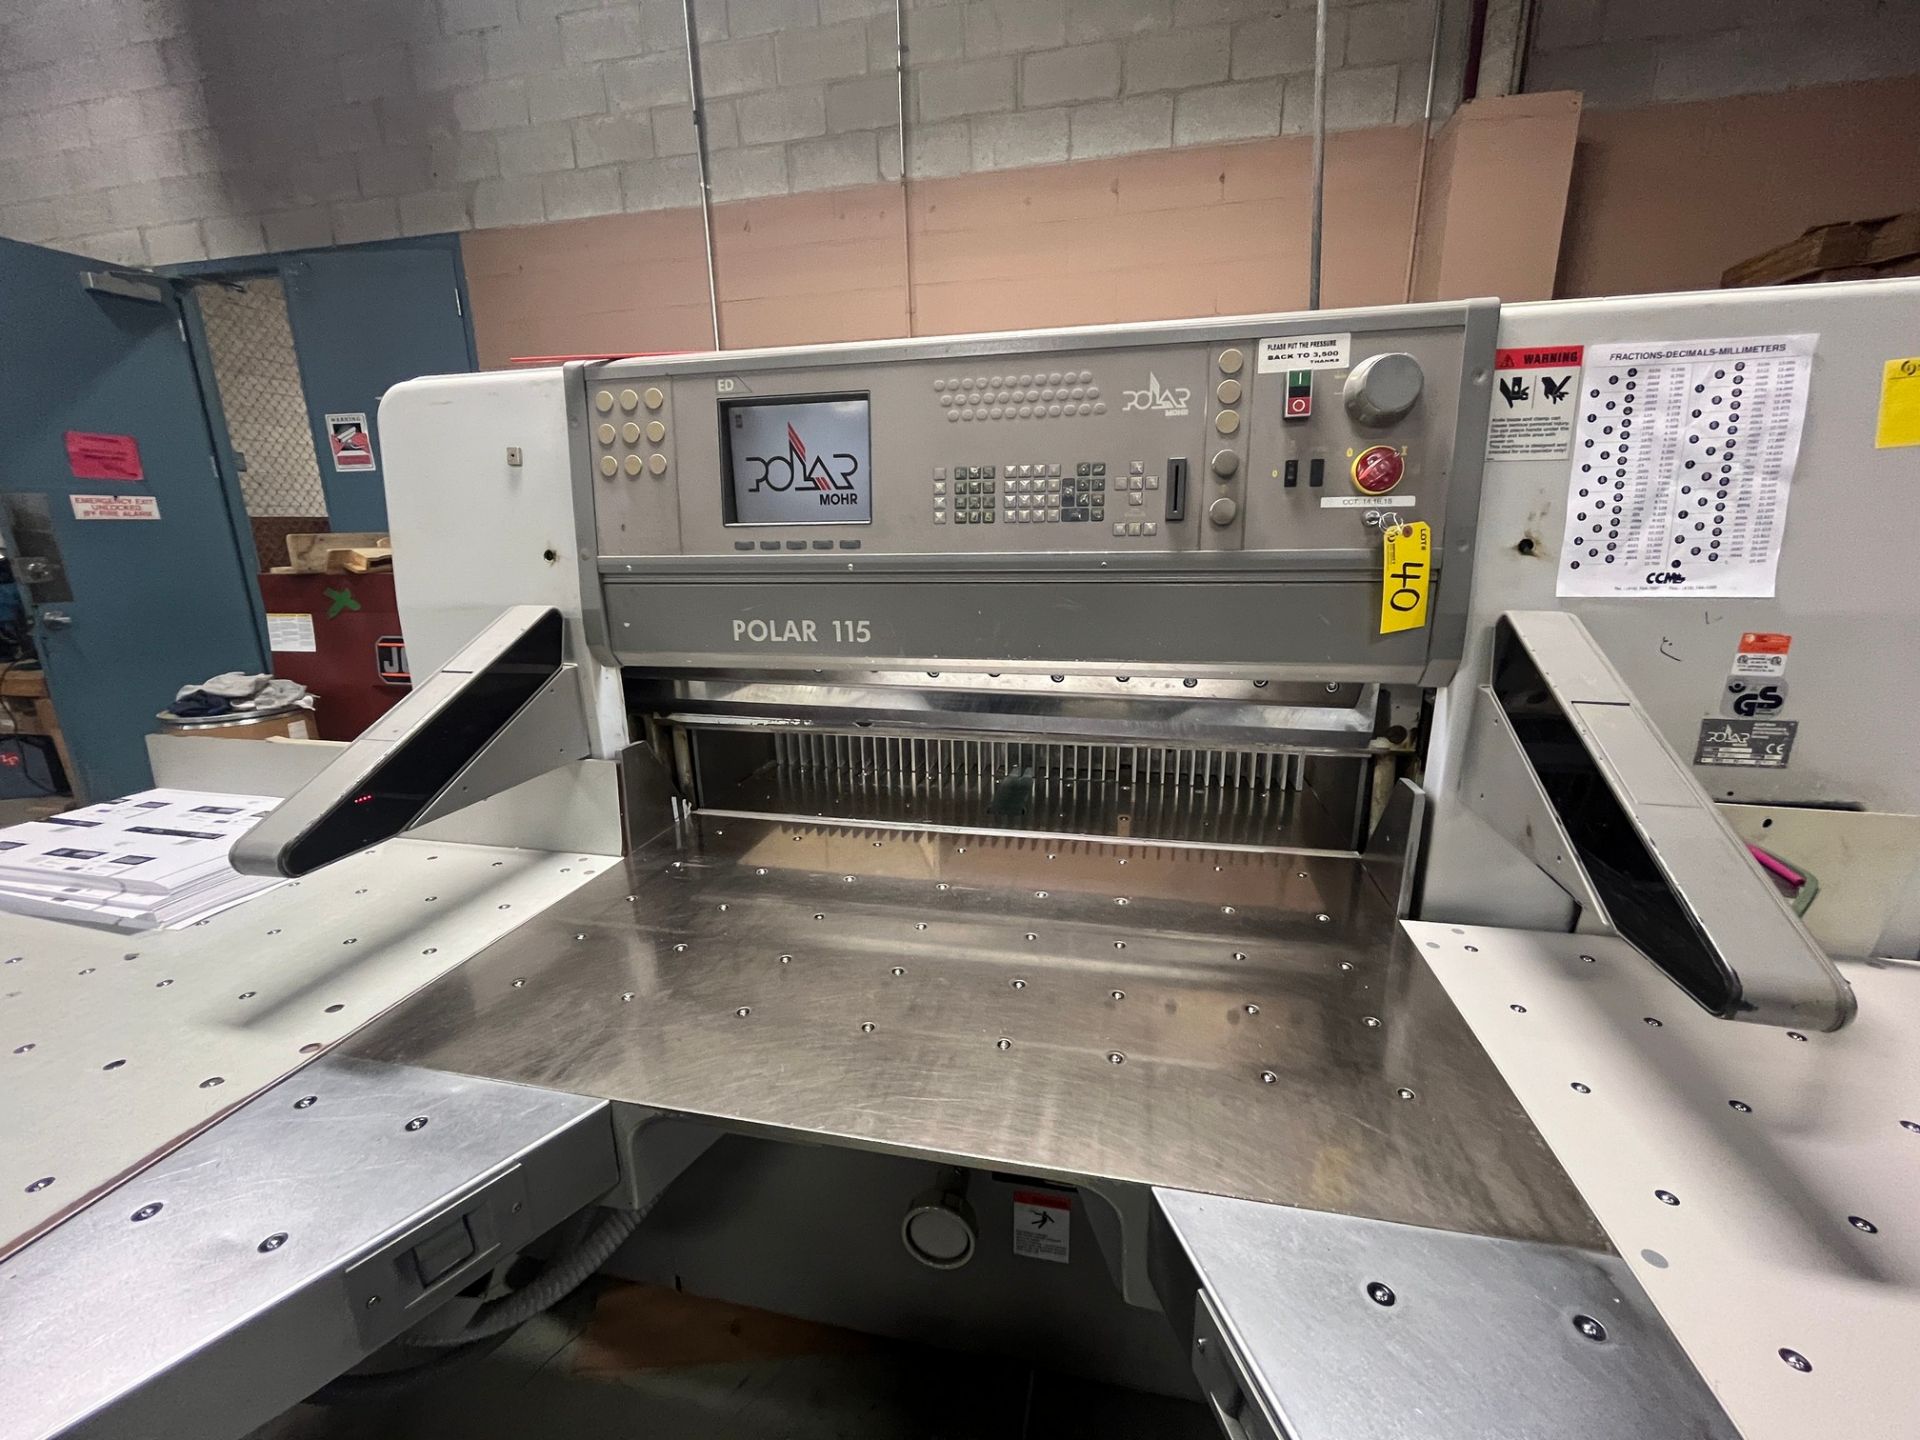 2000 POLAR MOHR 115 ED 45” PROGRAMMABLE PAPER CUTTER / GUILLOTINE CUTTER, S/N 7031262 (RIGGING - Image 3 of 5